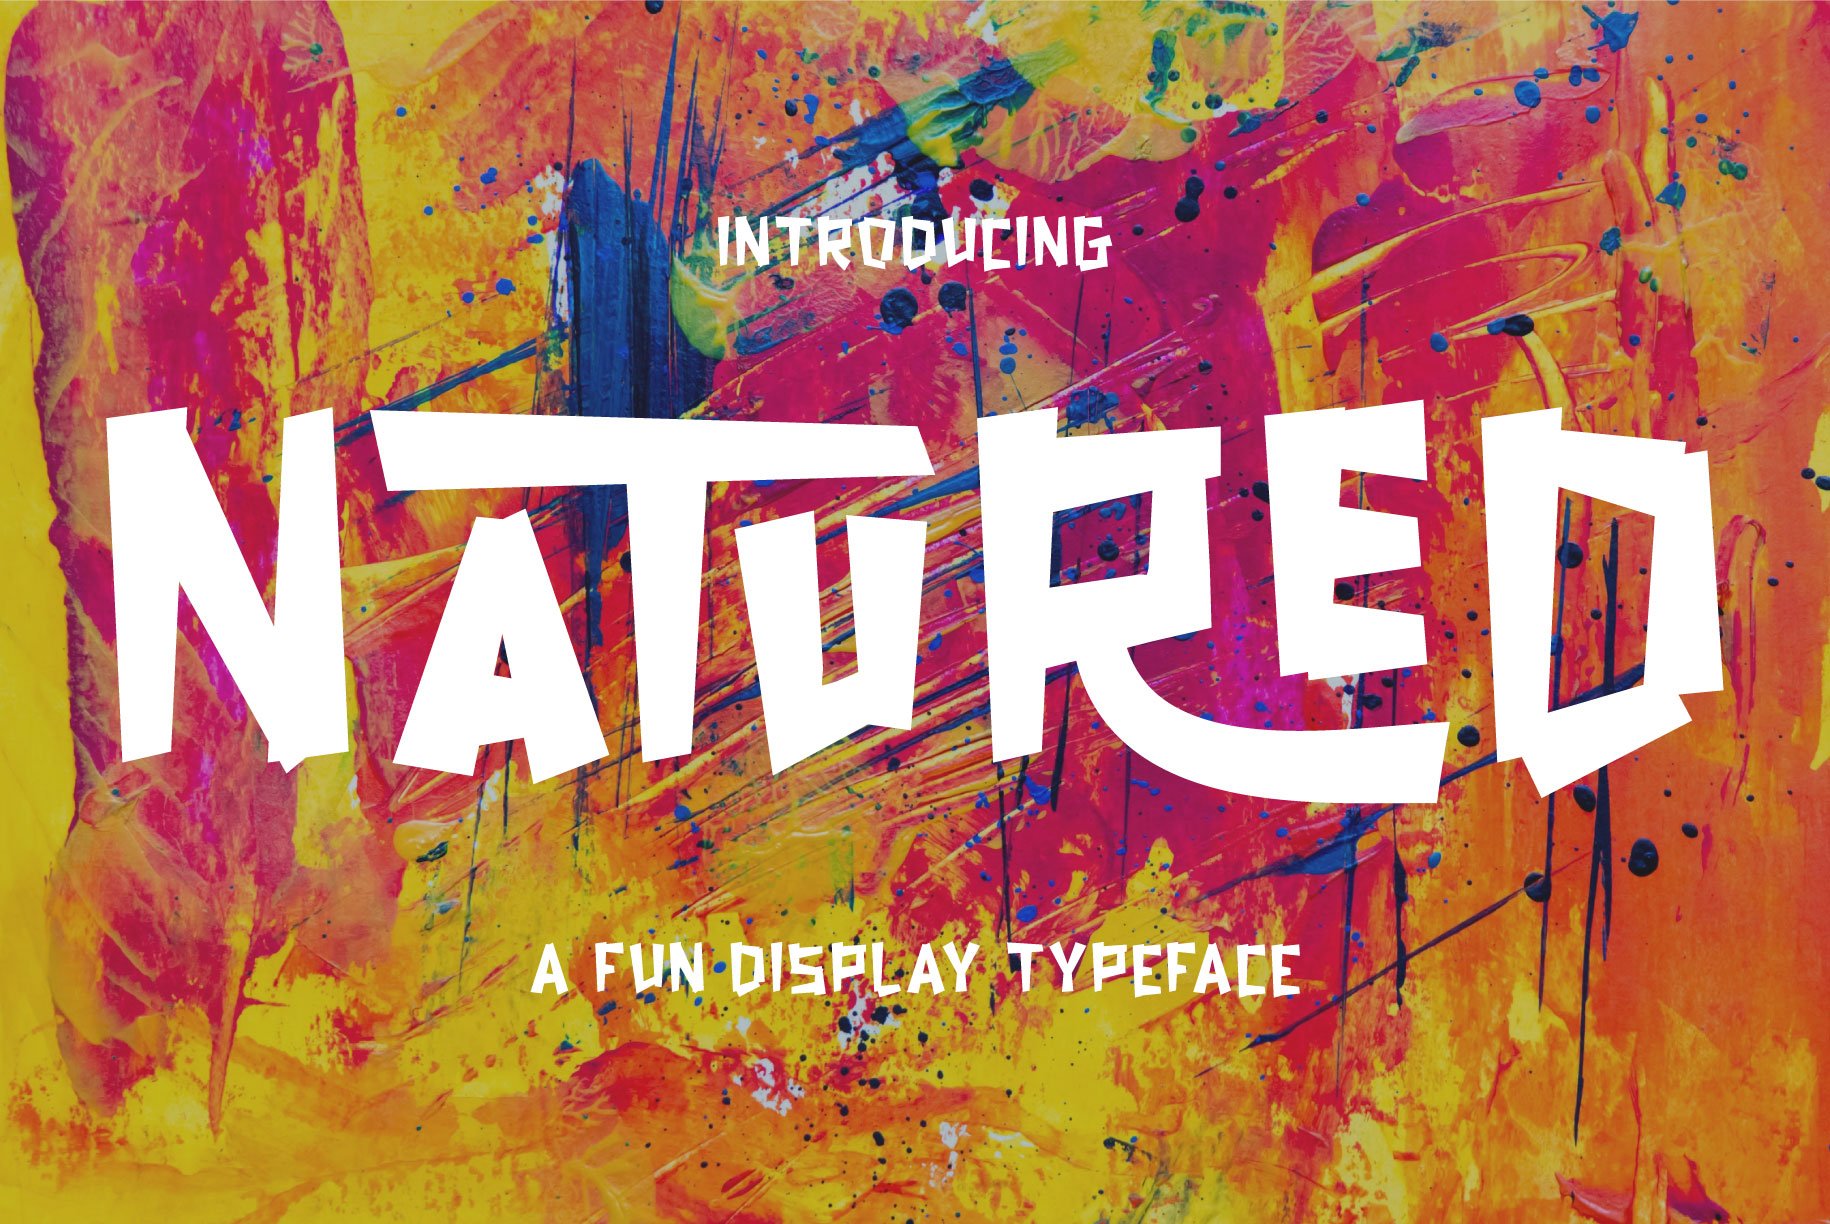 Natured - Modern and Fun Typeface cover image.